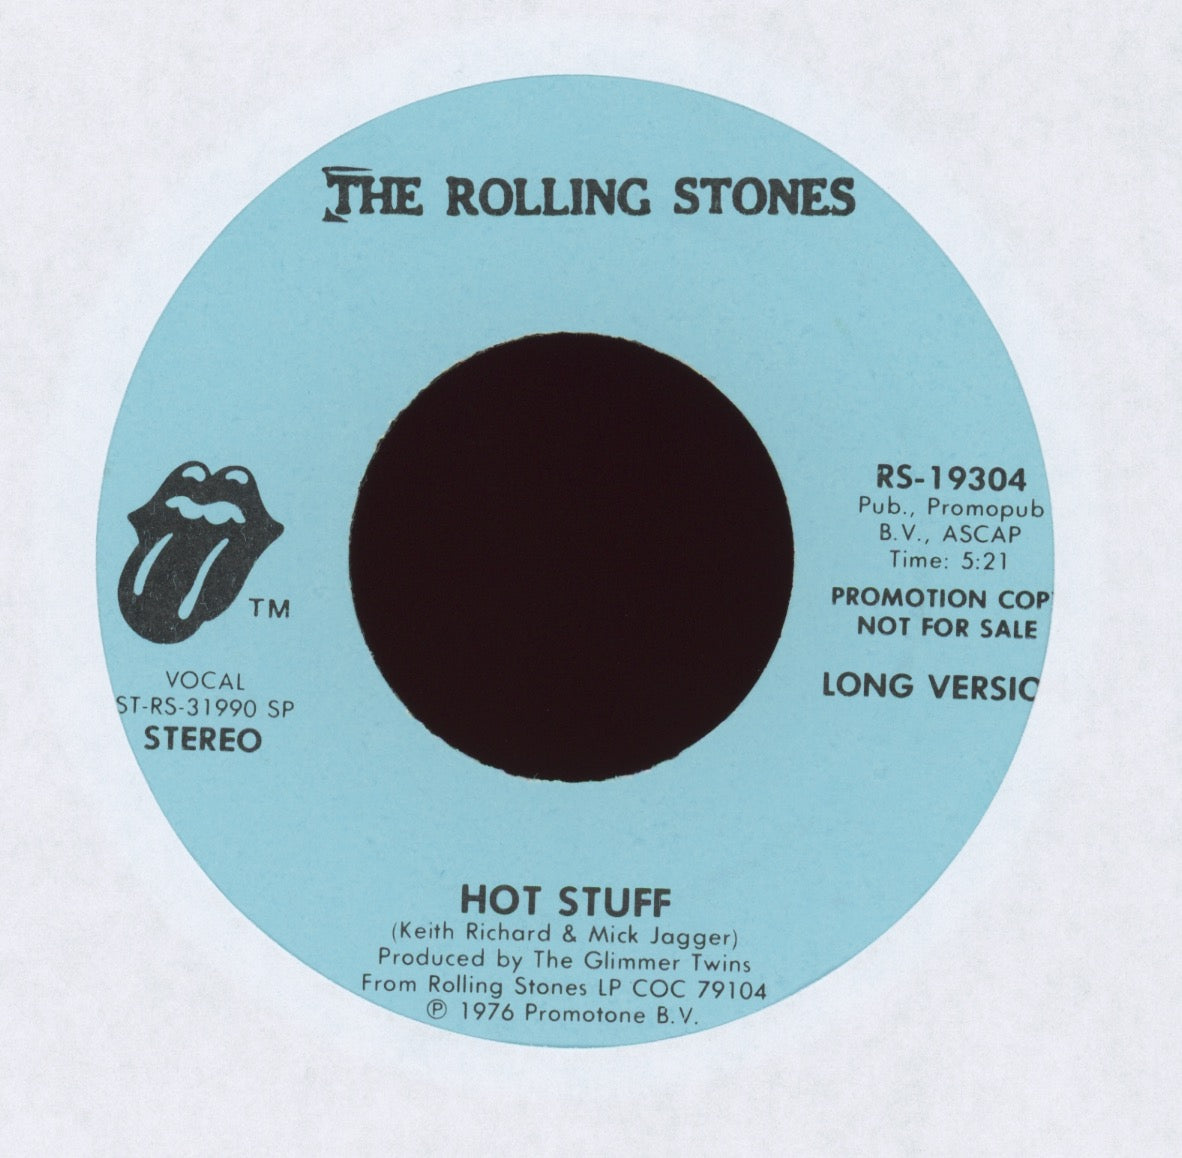 The Rolling Stones - Hot Stuff on Rolling Stones Records Promo